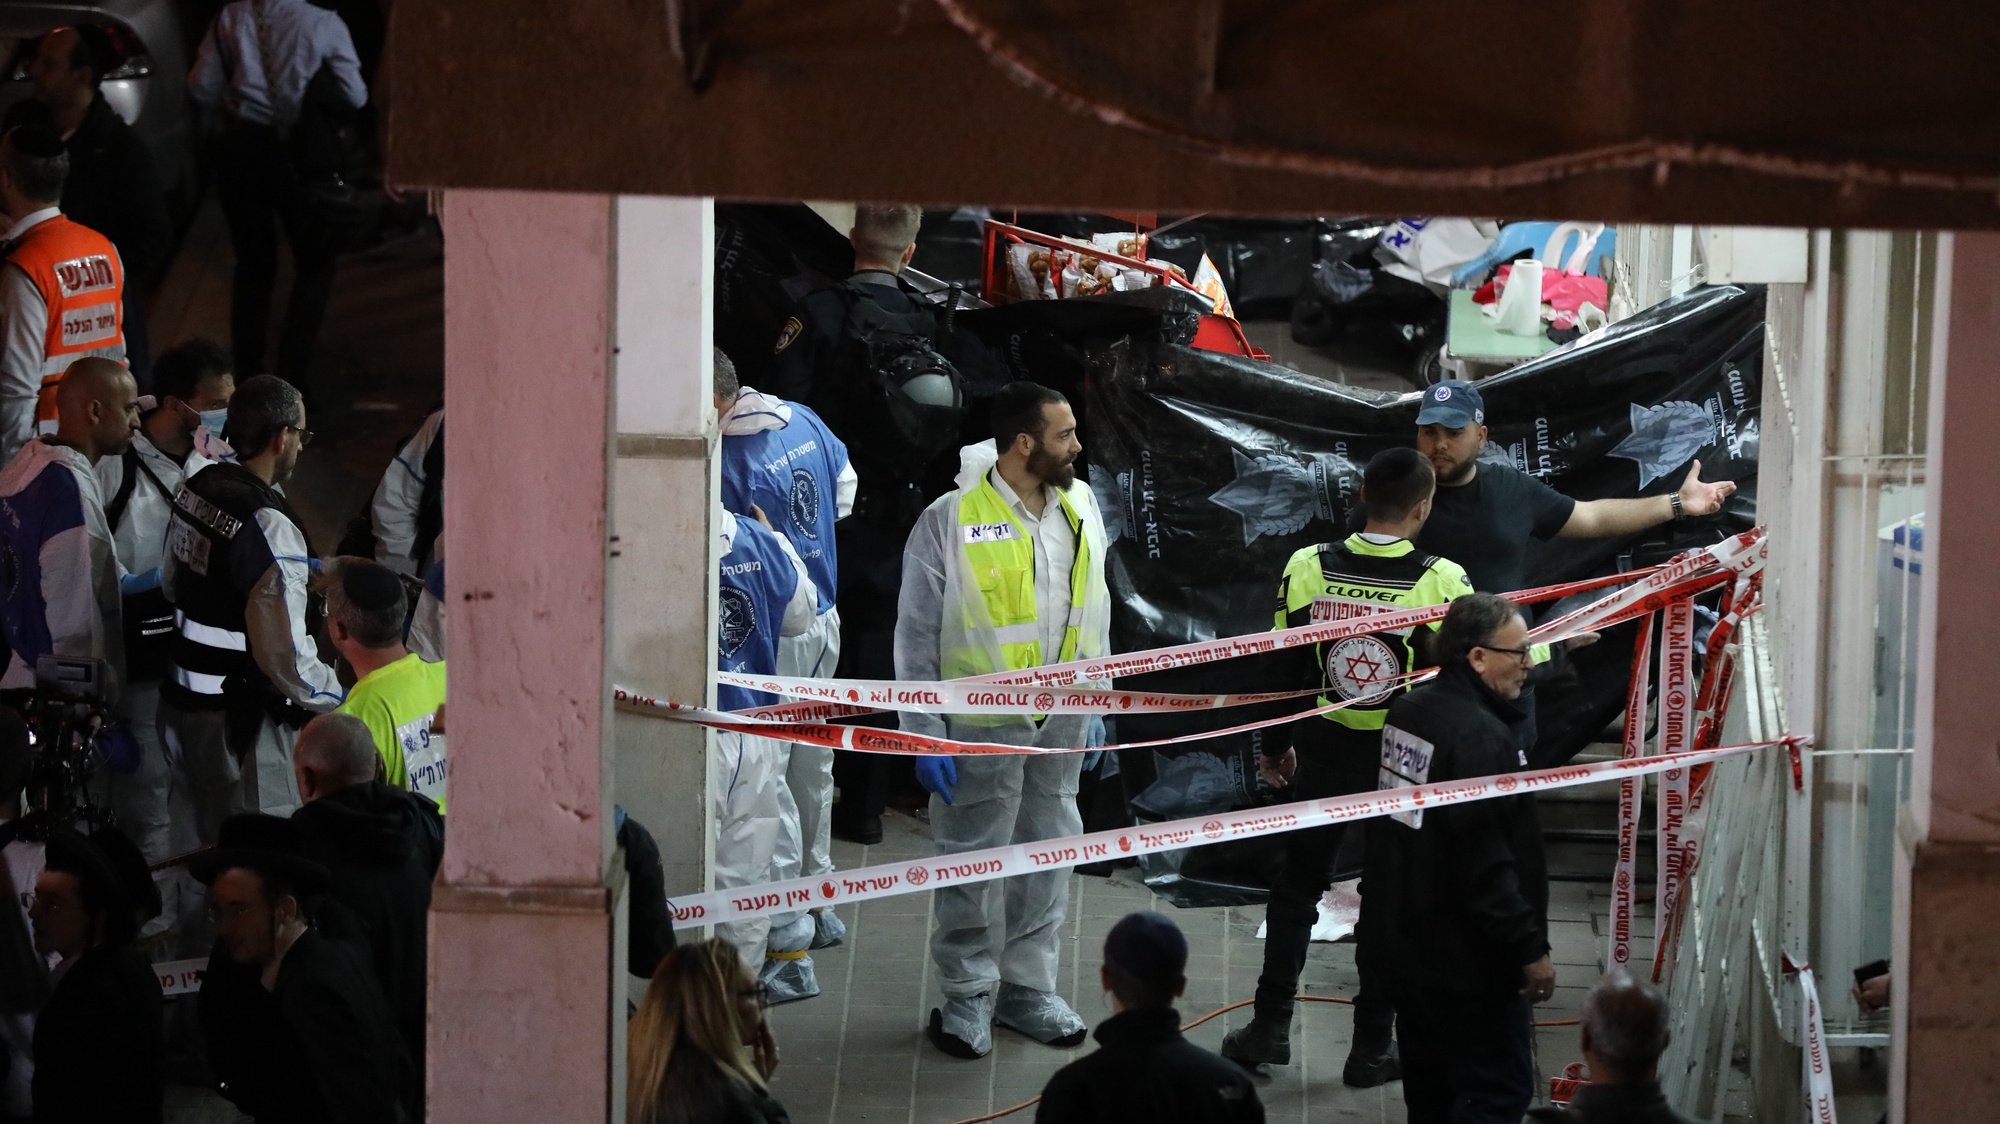 epa09858943 Israeli emergency personnel at the scene of attack in city of Bnei Brak, near Tel Aviv, Israel, 29 March 2022. According to emergency services, at least five Israelis where killed in a shooting attack by Israeli Arab gunmen.  EPA/ABIR SULTAN